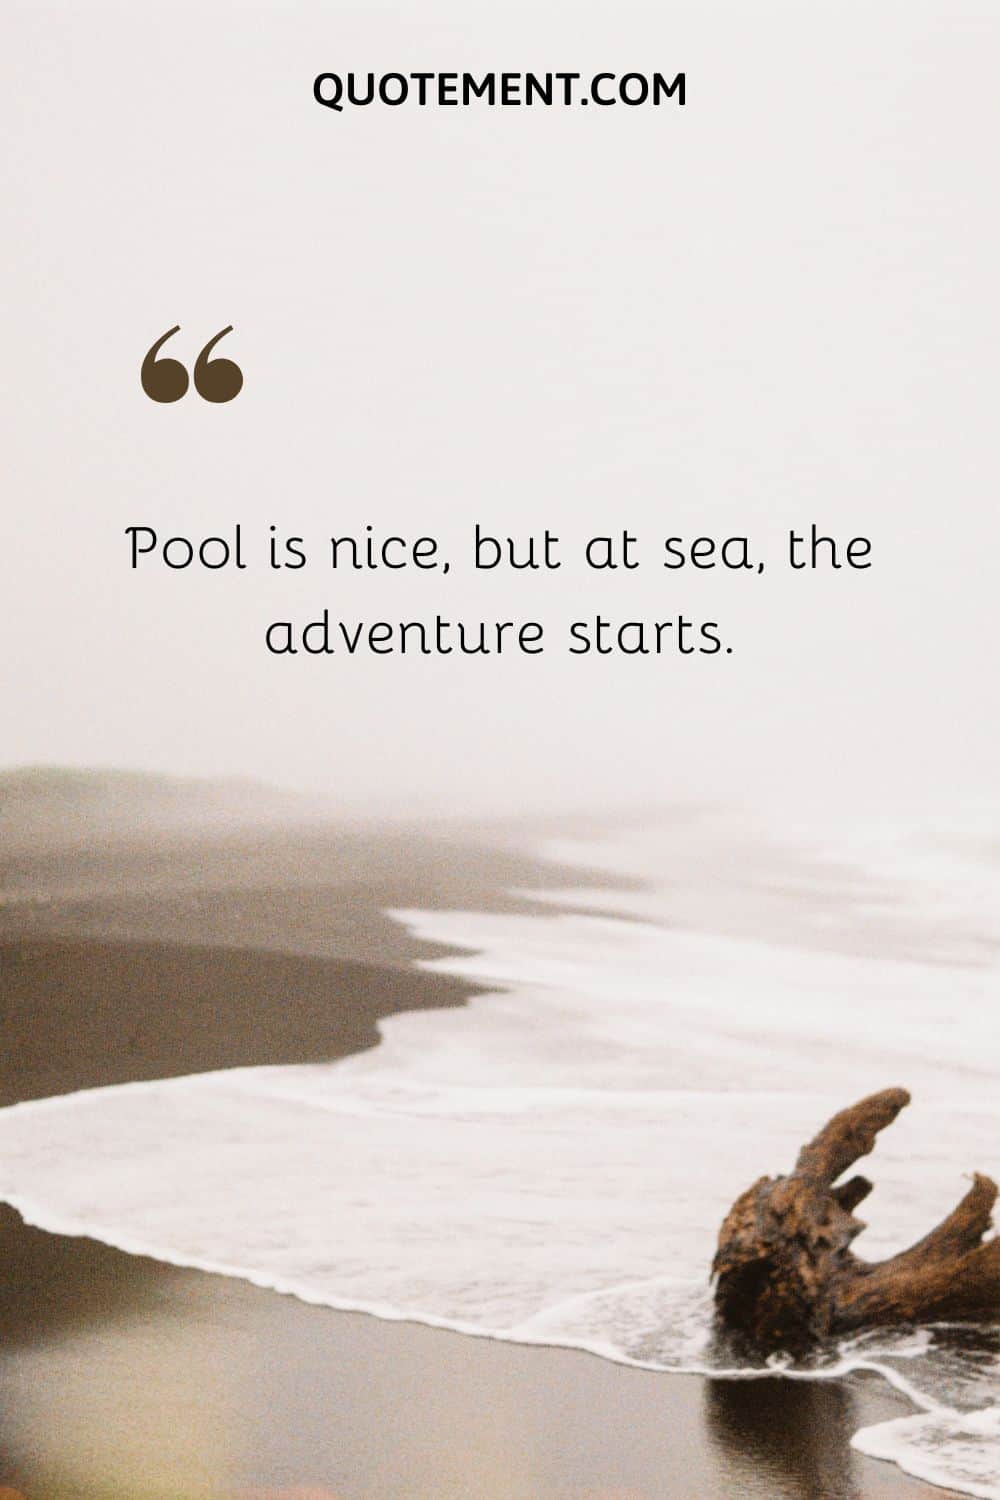 Pool is nice, but at sea, the adventure starts.